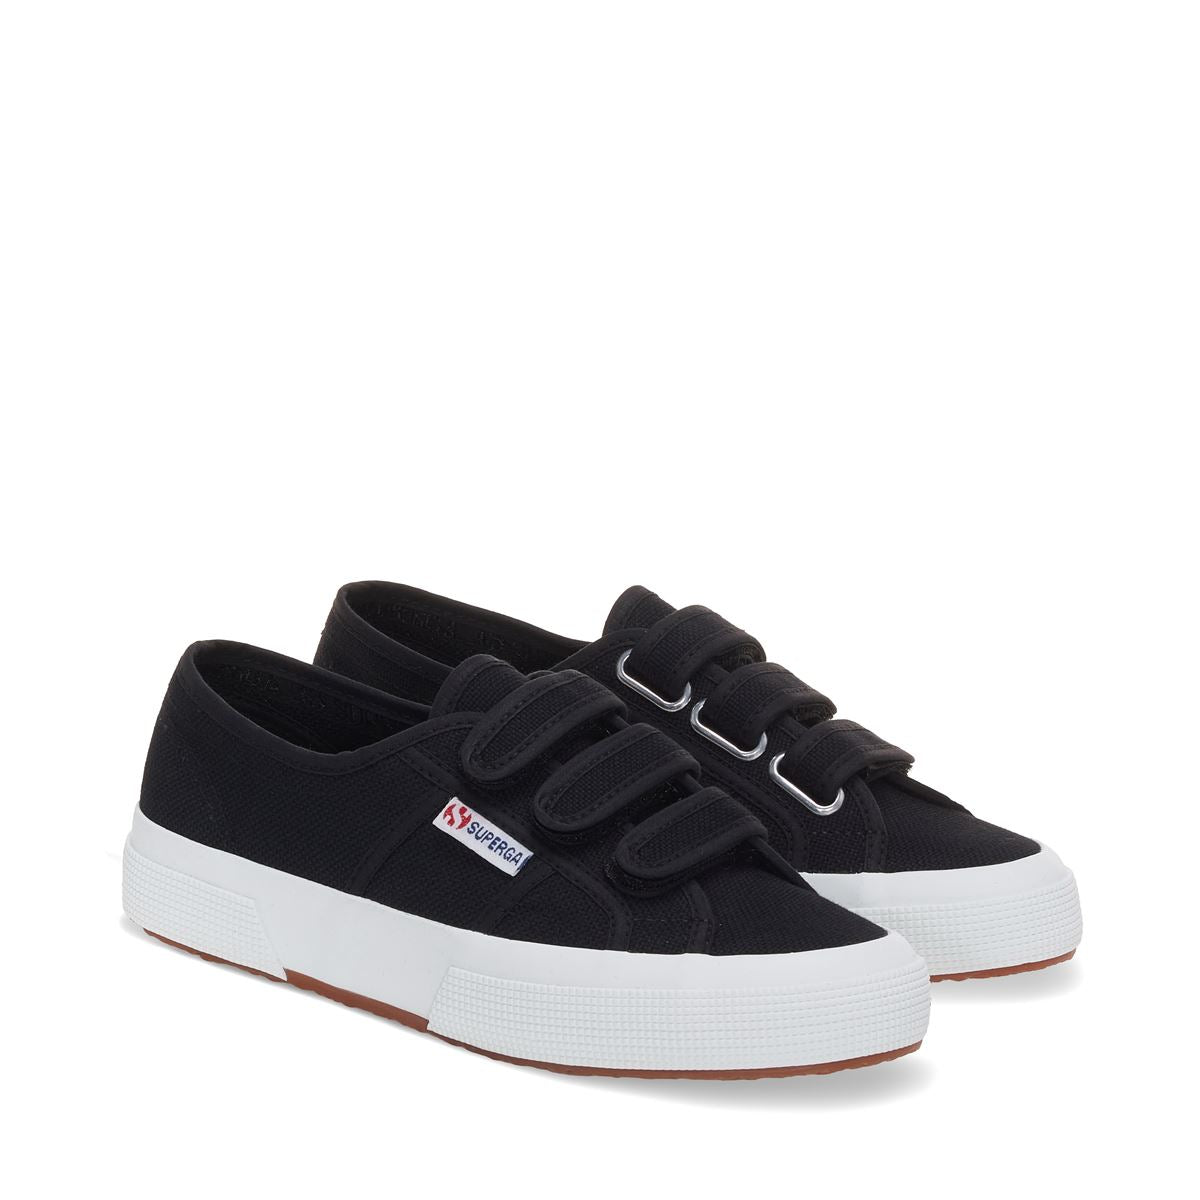 Tenis Velcro Negros 2750 Cot3strapu- Hover Image